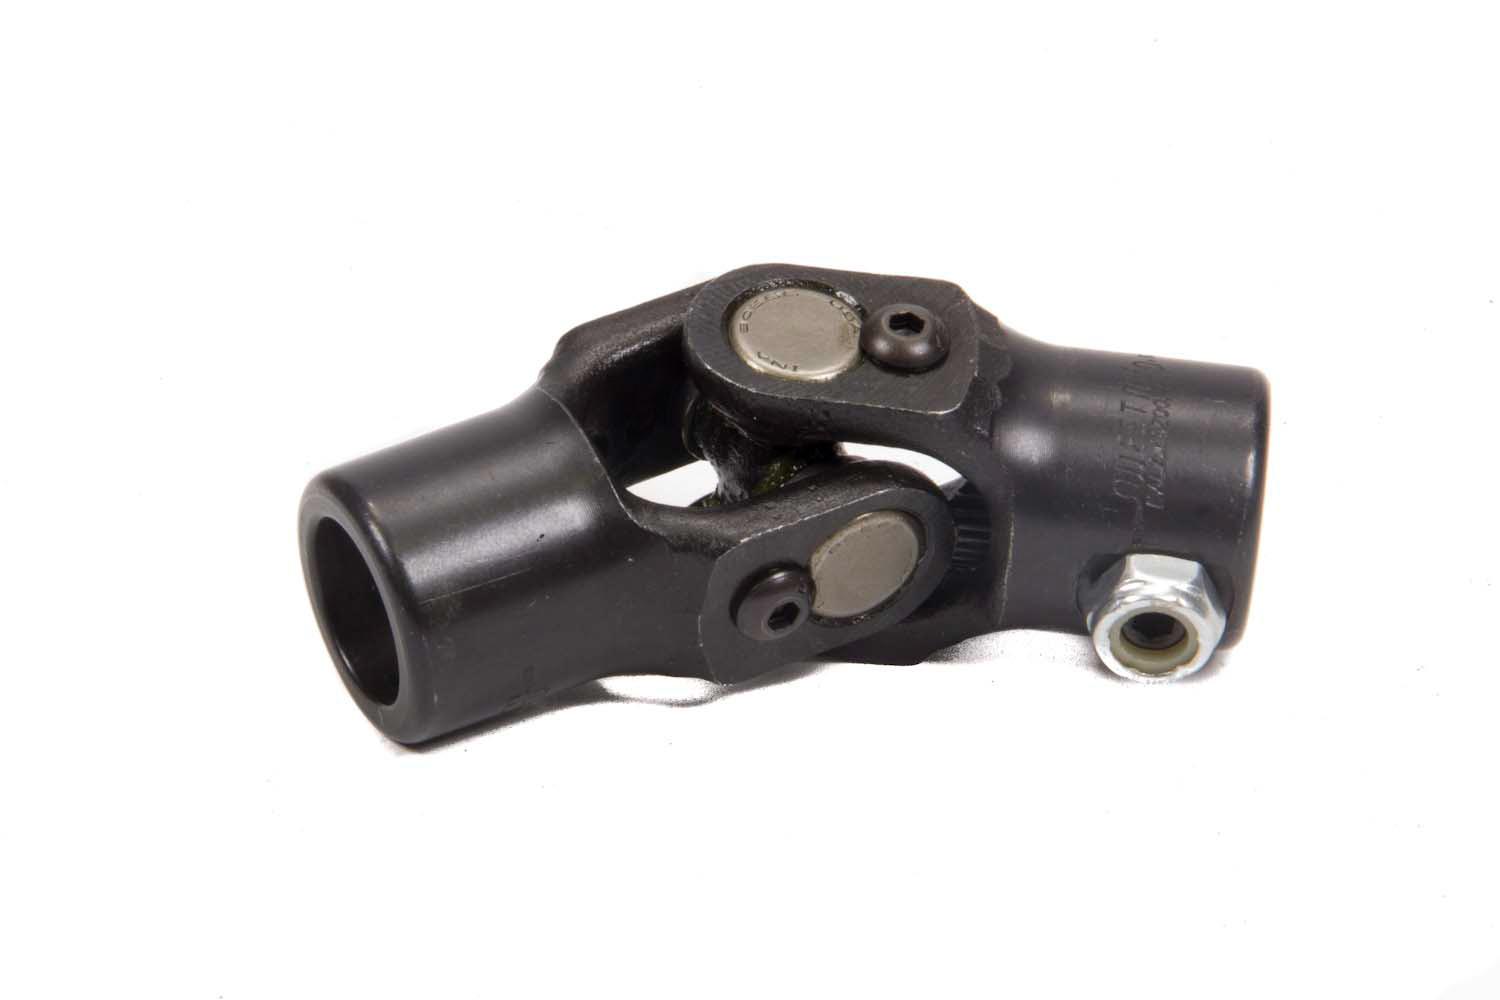 Sweet Manufacturing 401-51219 Steering Universal Joint, Single Joint, 3/4 in 36 Spline to 3/4 in Double D, Steel, Black Paint, Each